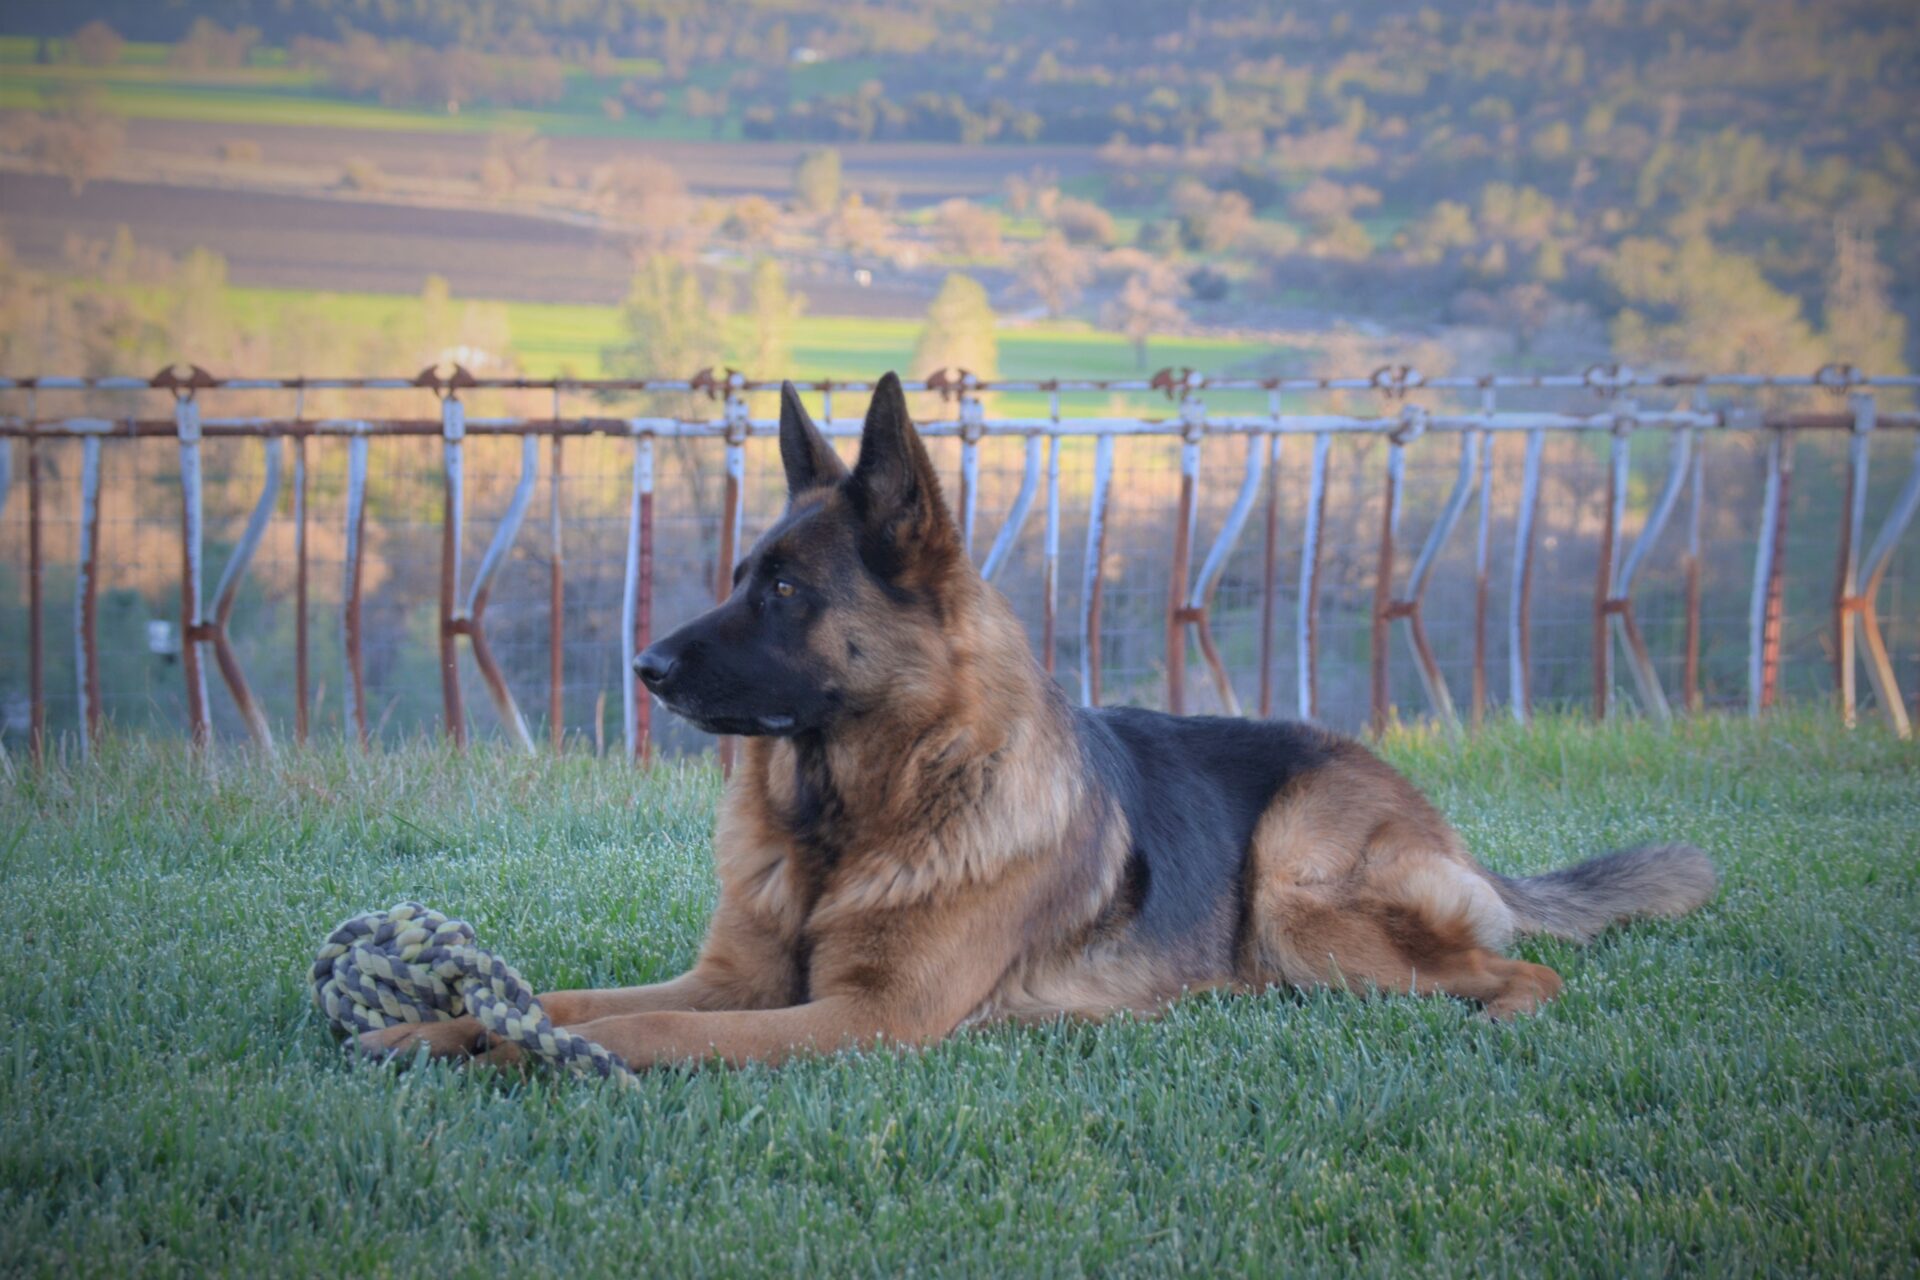 A german shepherd laying in the grass near a fence.